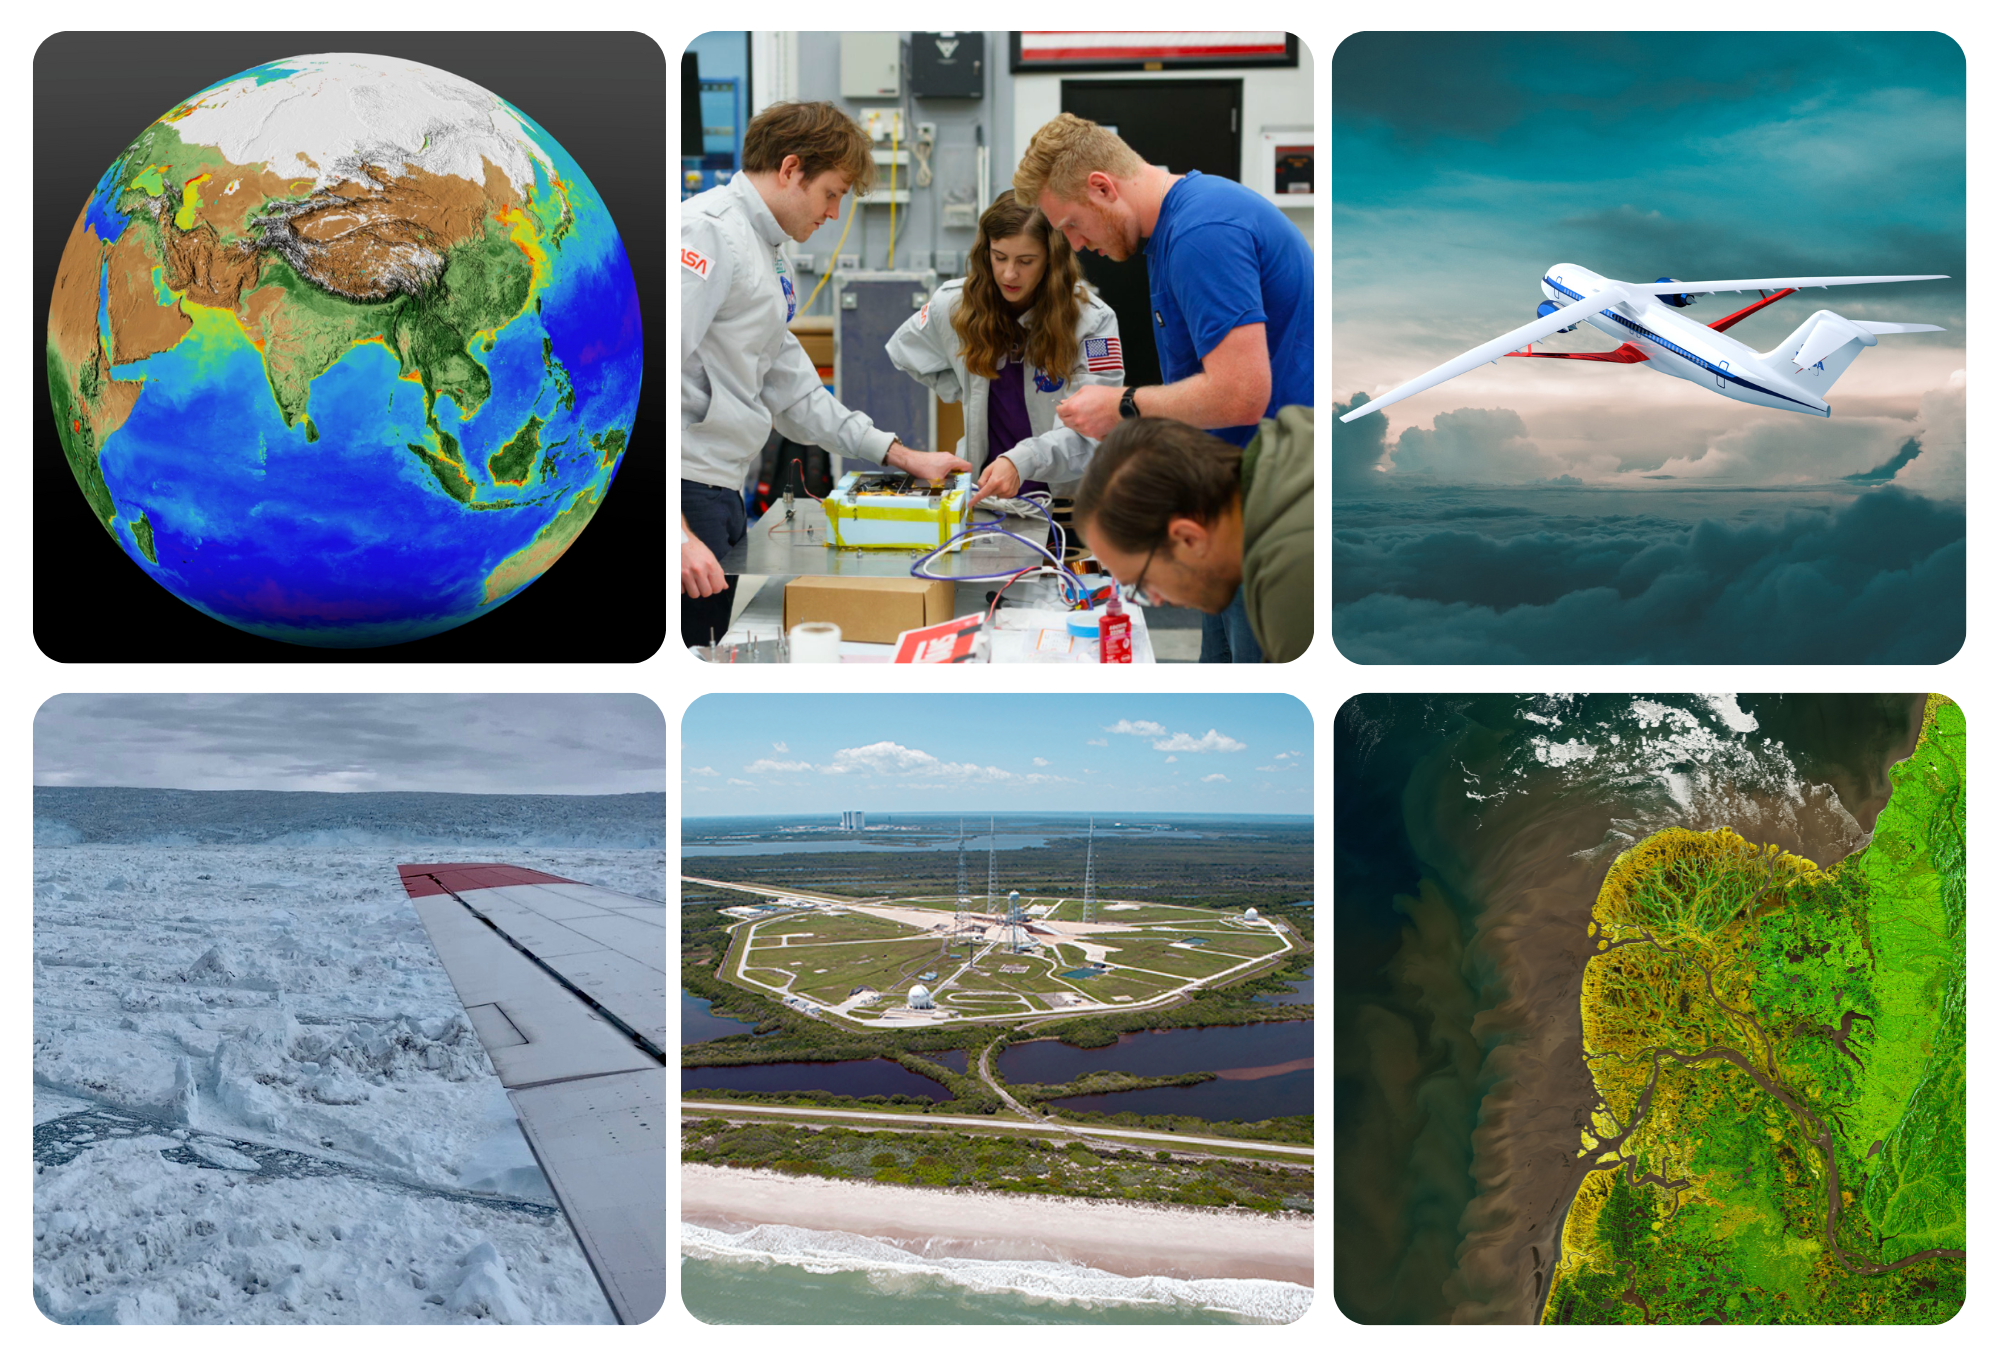 A collage of six images. From top left, an image of the world, students working on a payload, illustration of an aircraft in the sky, inside a plane of the wing and ice, launch pad area, and an aerial image from space of green water area.